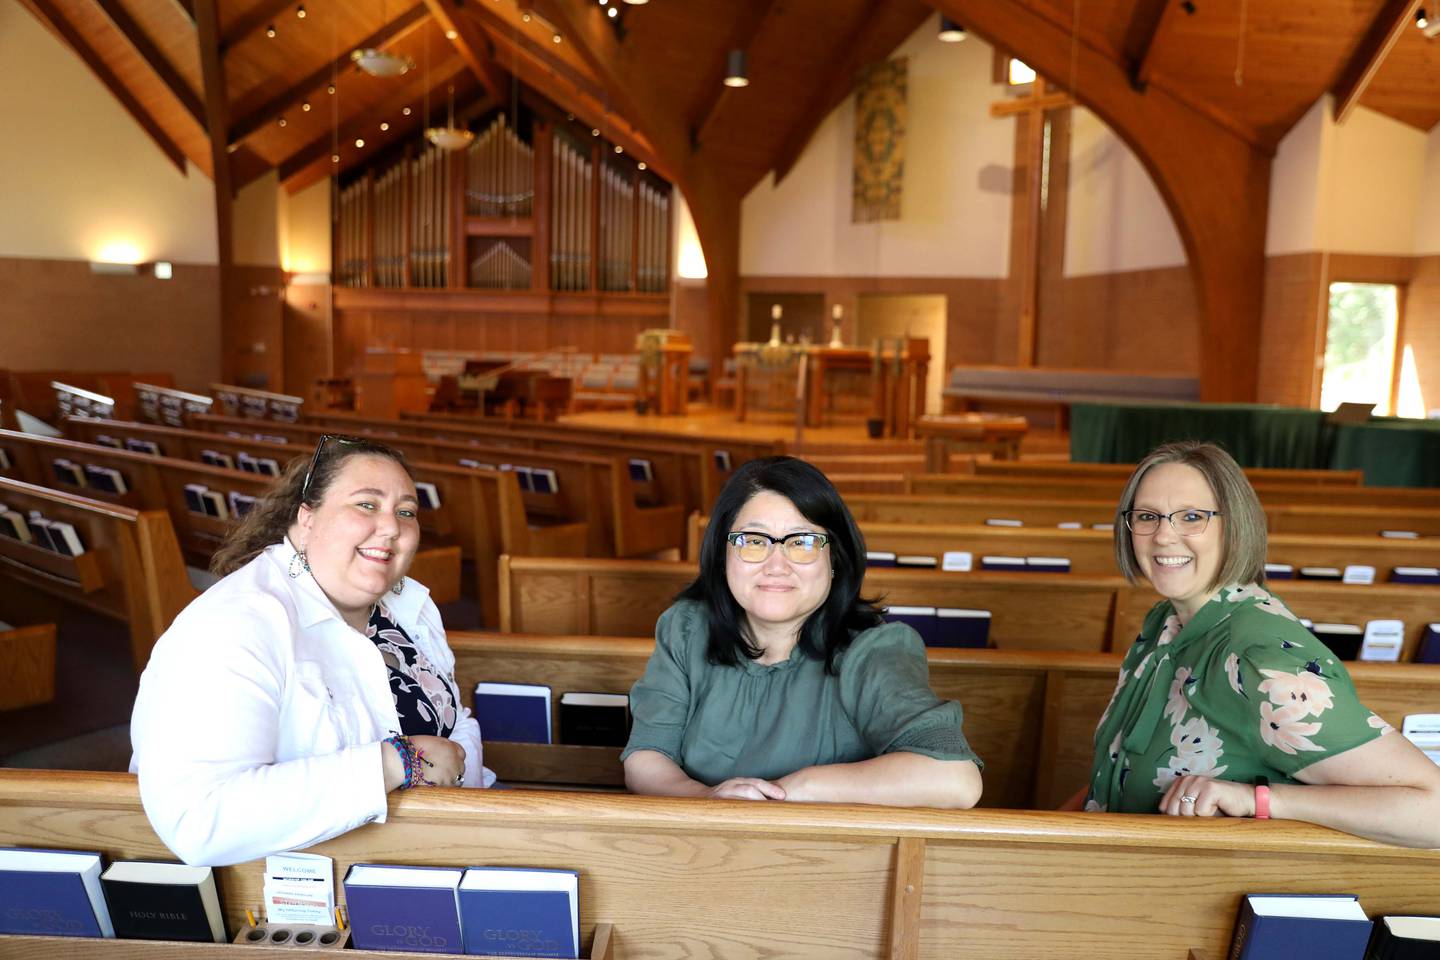 (From left) Rev. Becky Bryan, Rev. Michelle Hwang and Rev. Stephanie Anthony, who also serves as head of staff, form the all-female pastoral staff at Fox Valley Presbyterian Church in Geneva.